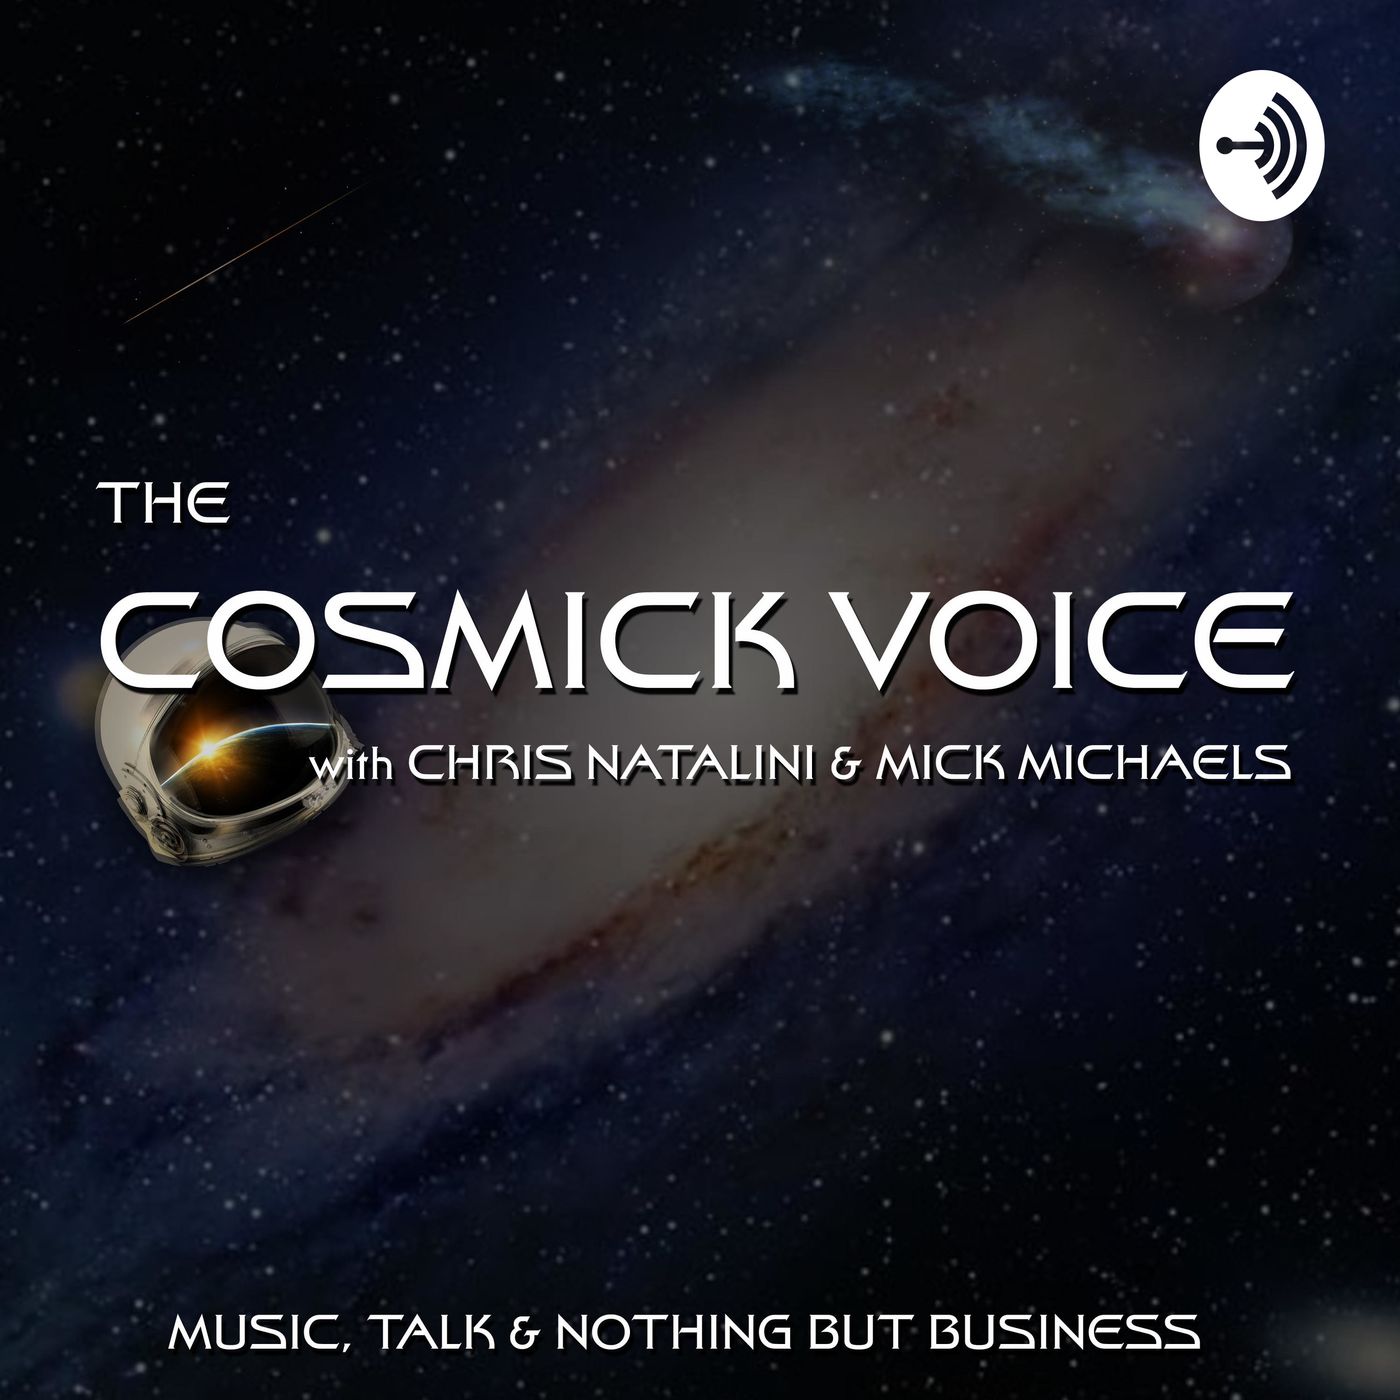 The Cosmick Voice Season 6 Episode 24 "That's What Makes Us Different"